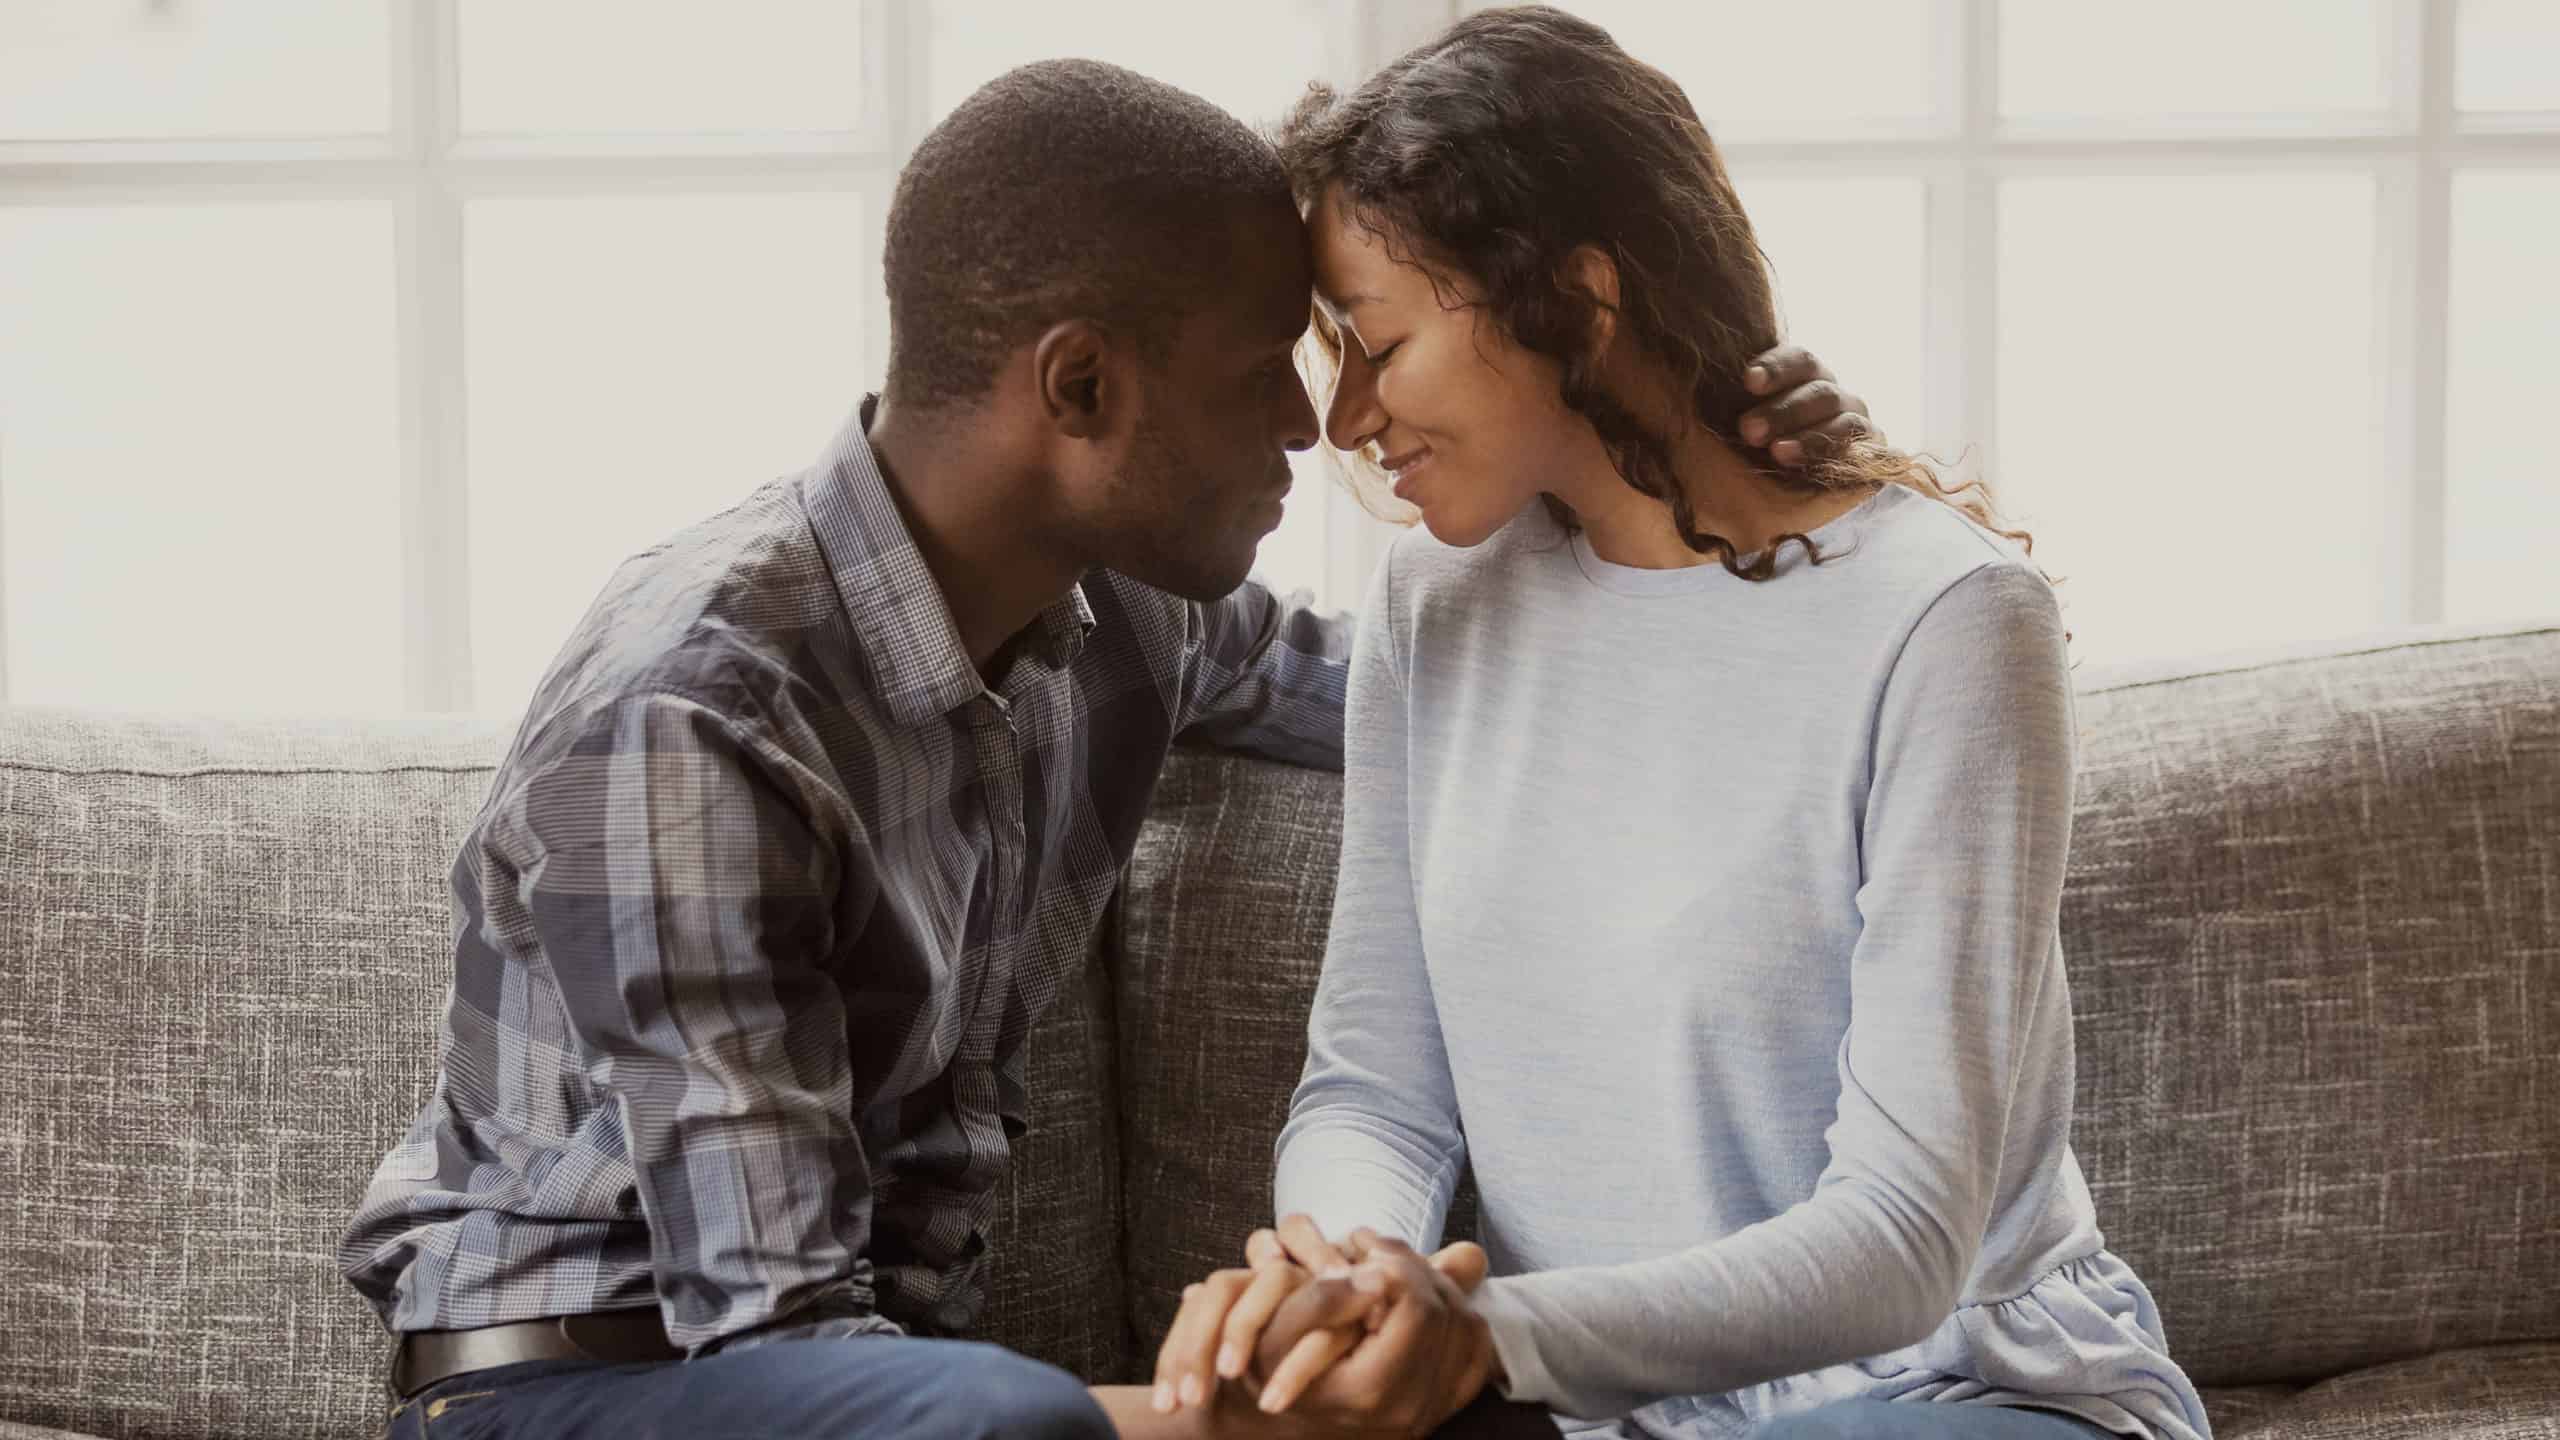 Young, affectionate African-American couple sitting on a couch holding hands, leaning head to head